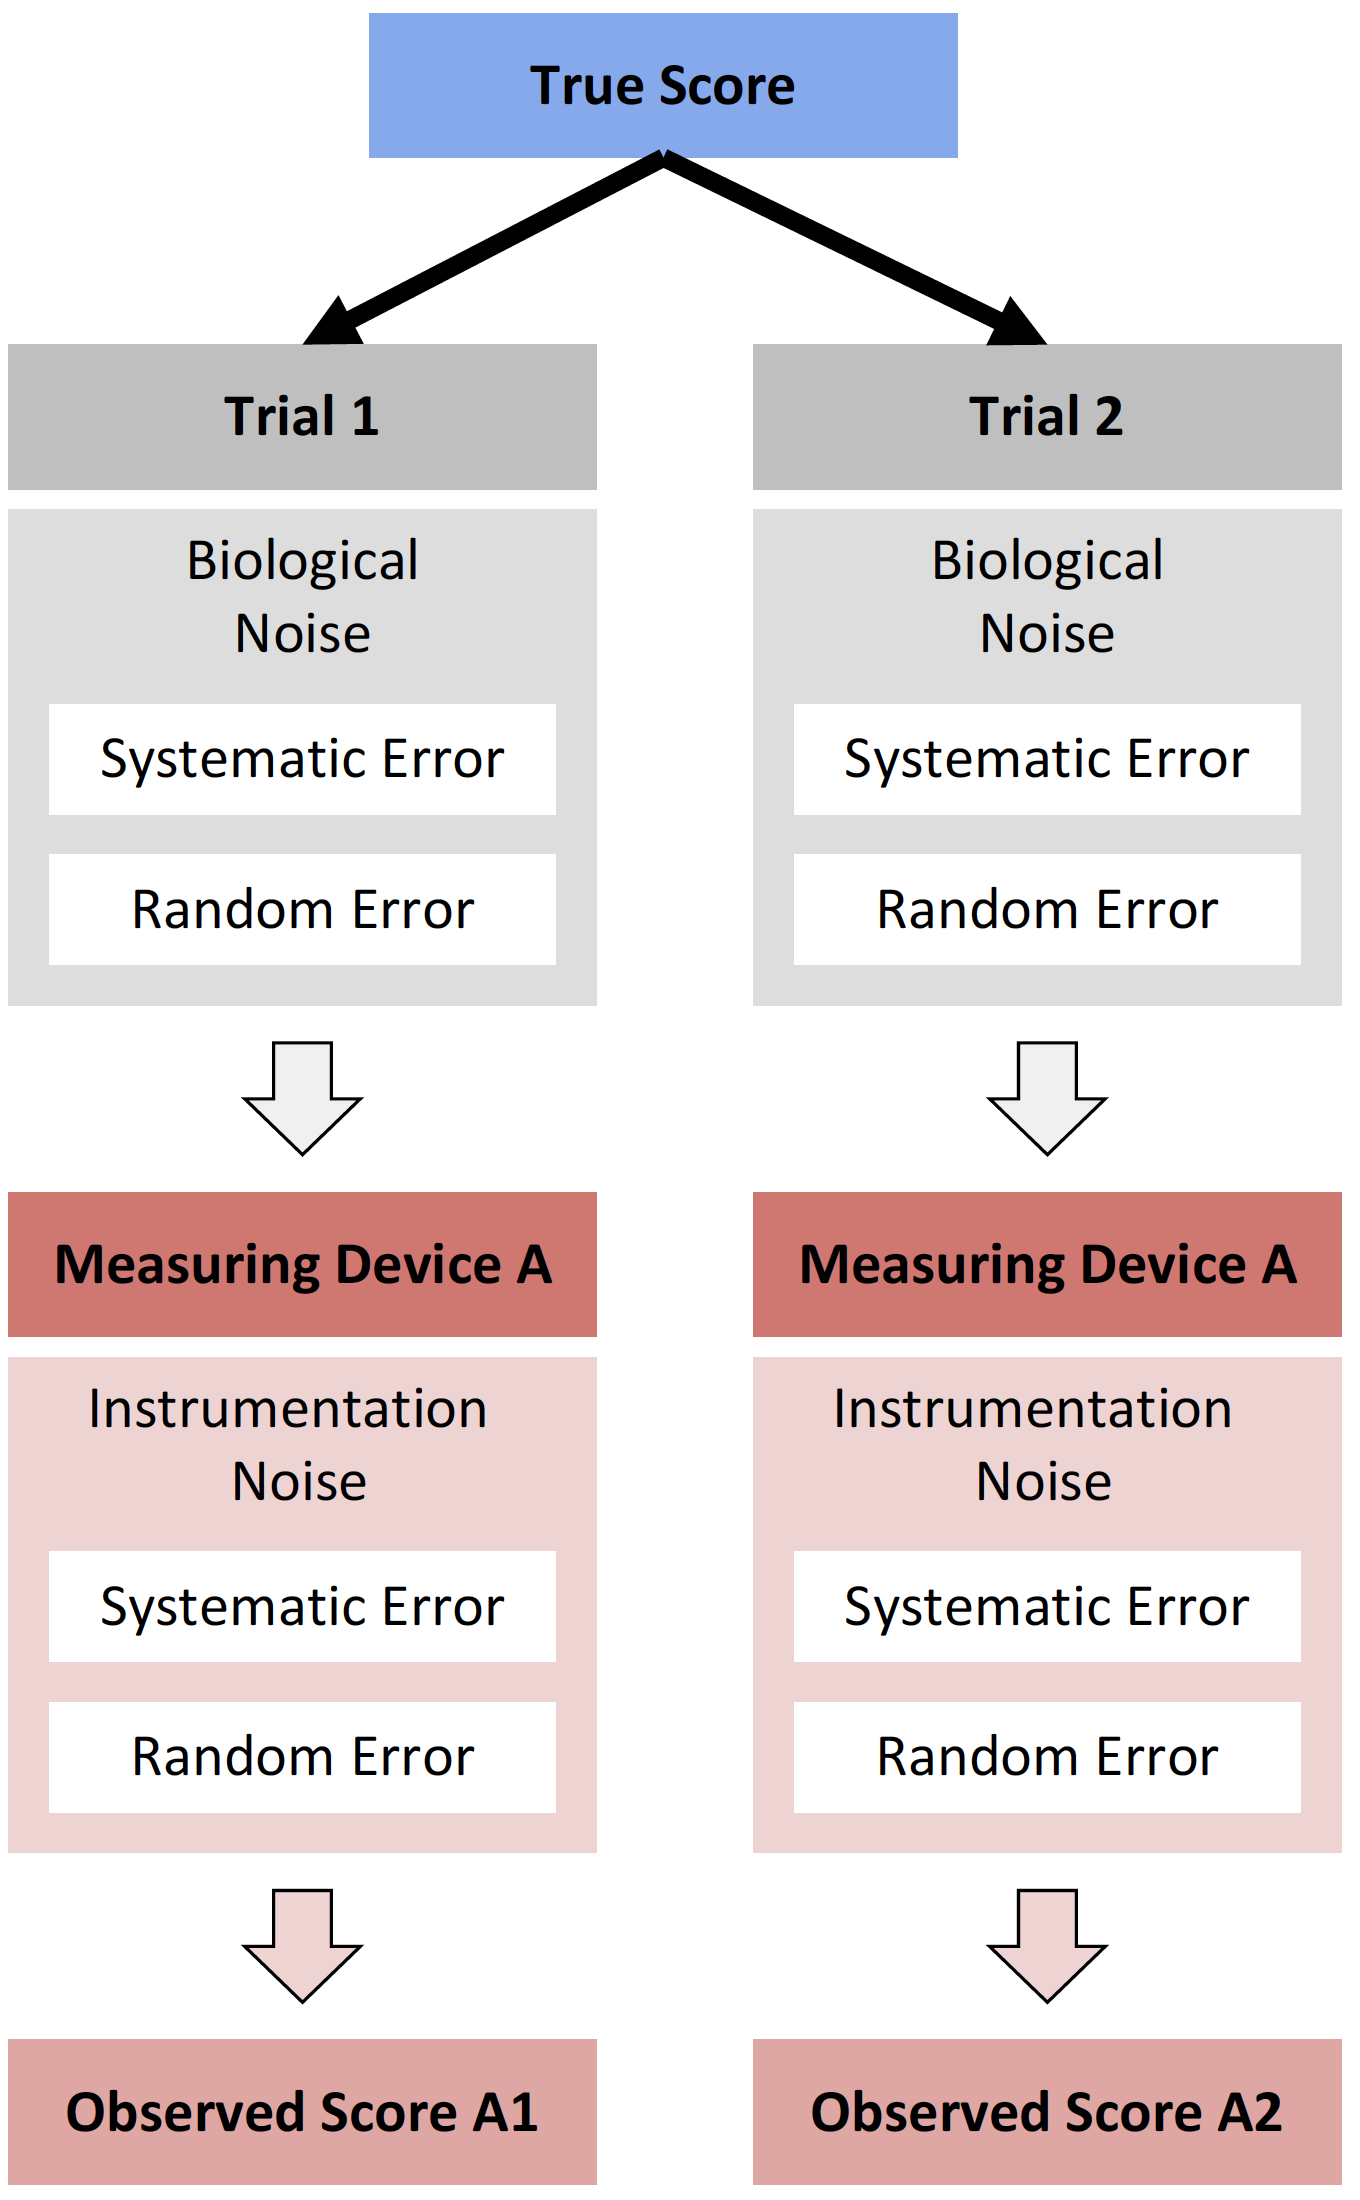 Propagation of the random component of measurement error to two trials